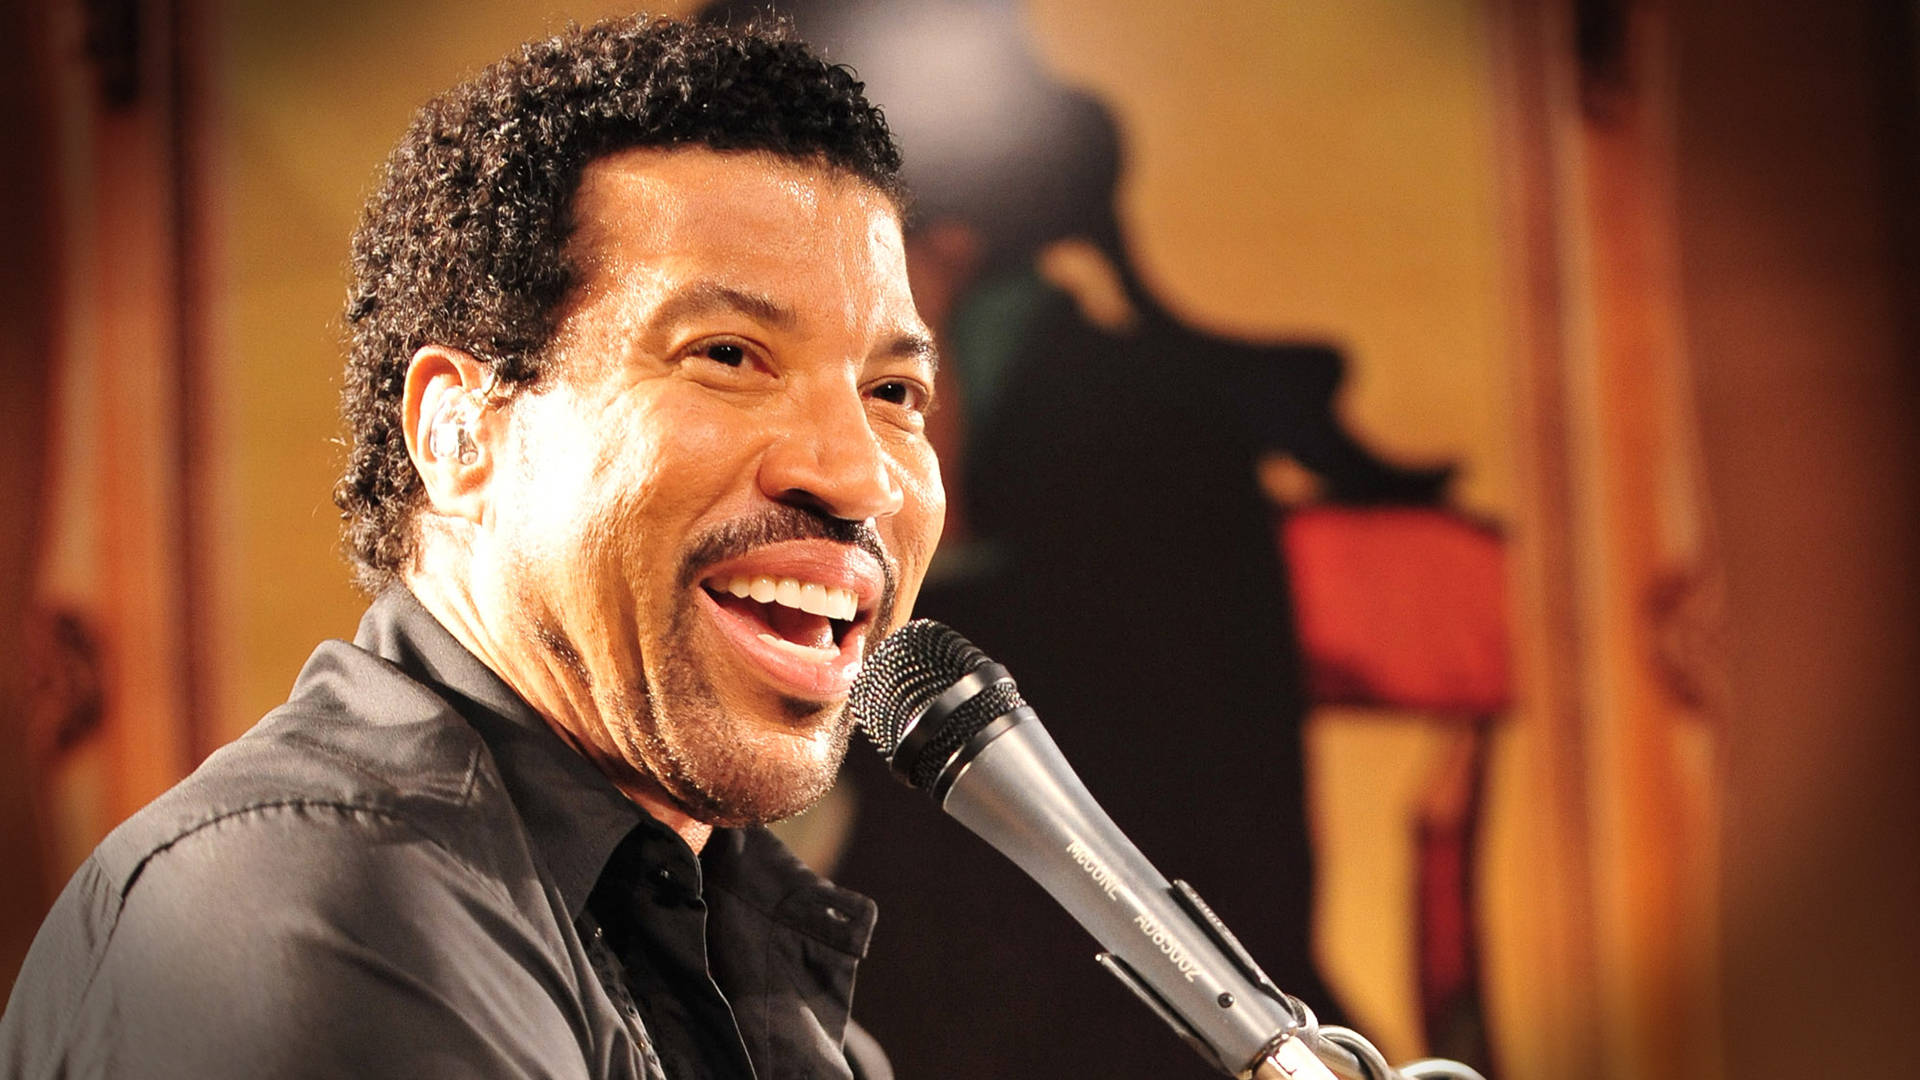 Lionel Richie Singer And Songwriter Wallpaper